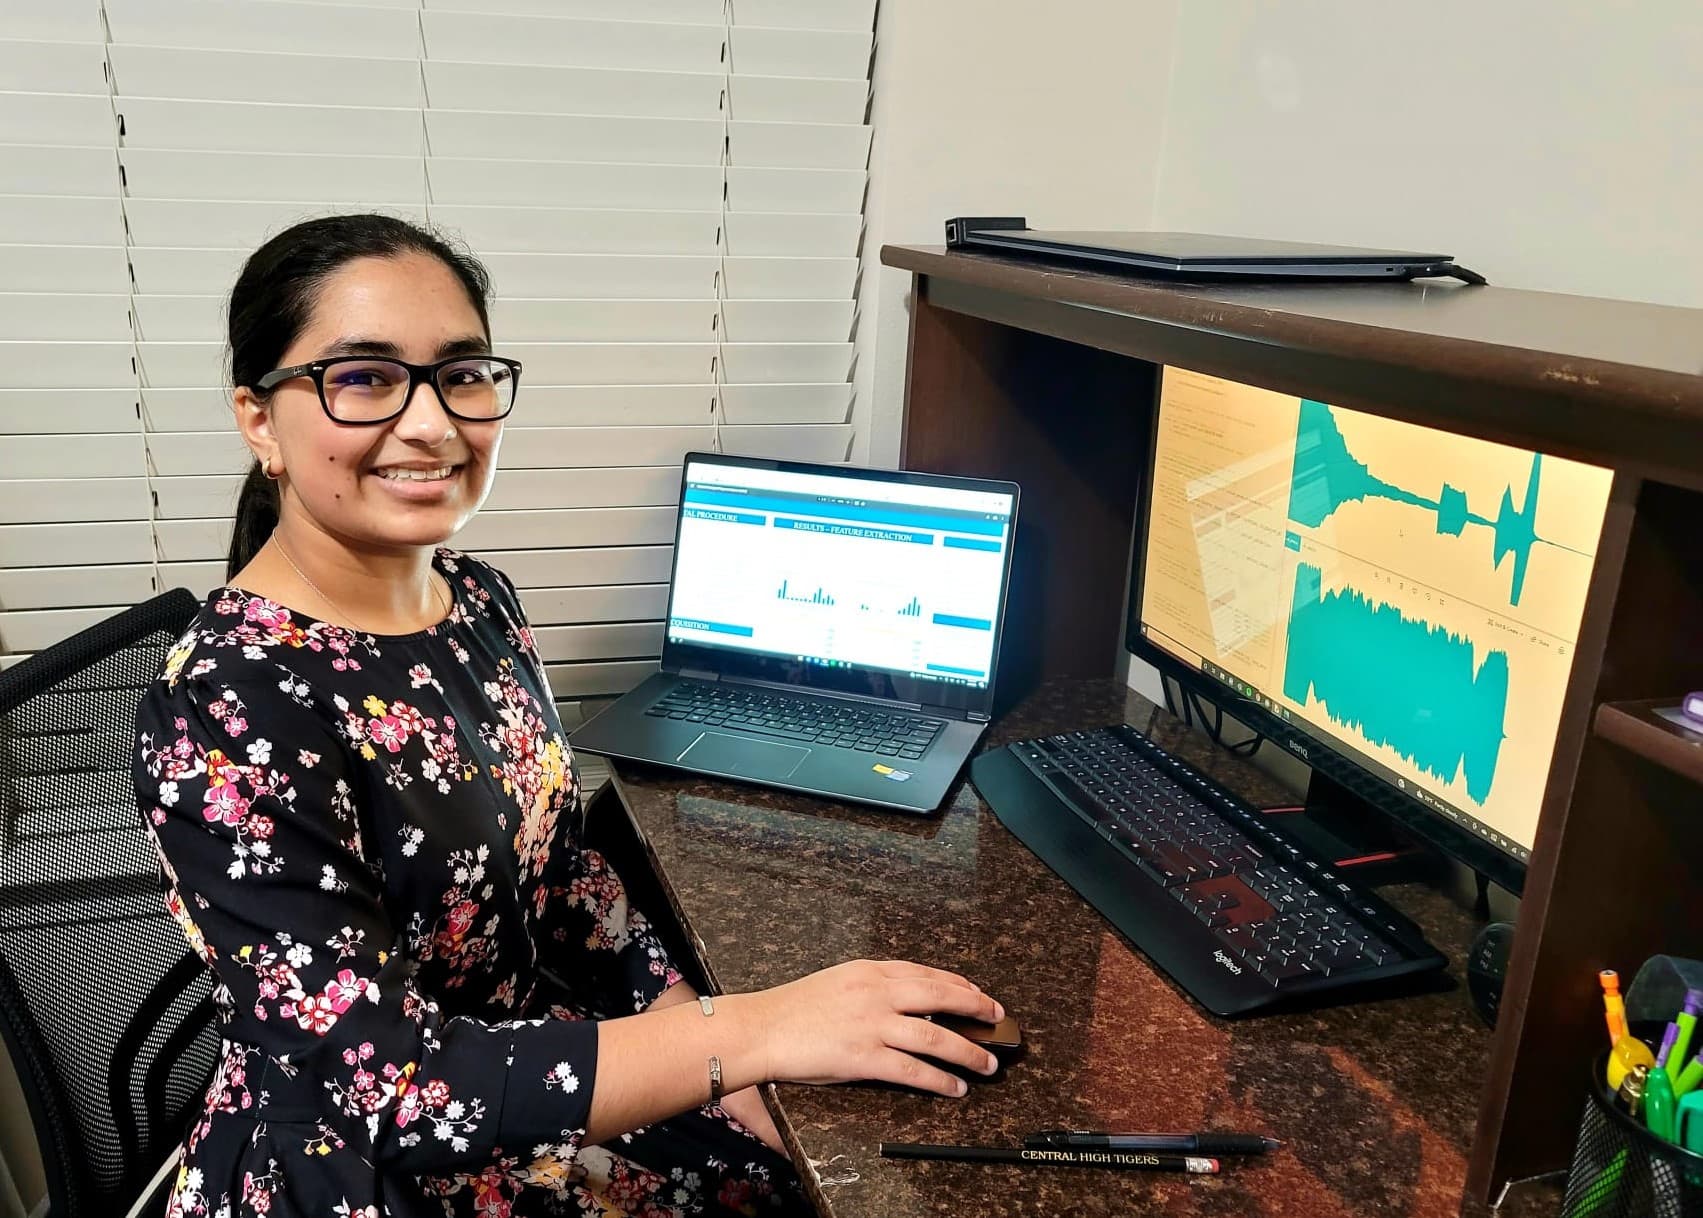 Anu Iyer, a junior at Little Rock Central High School, was invited to join a UAMS research team studying Parkinson's disease.